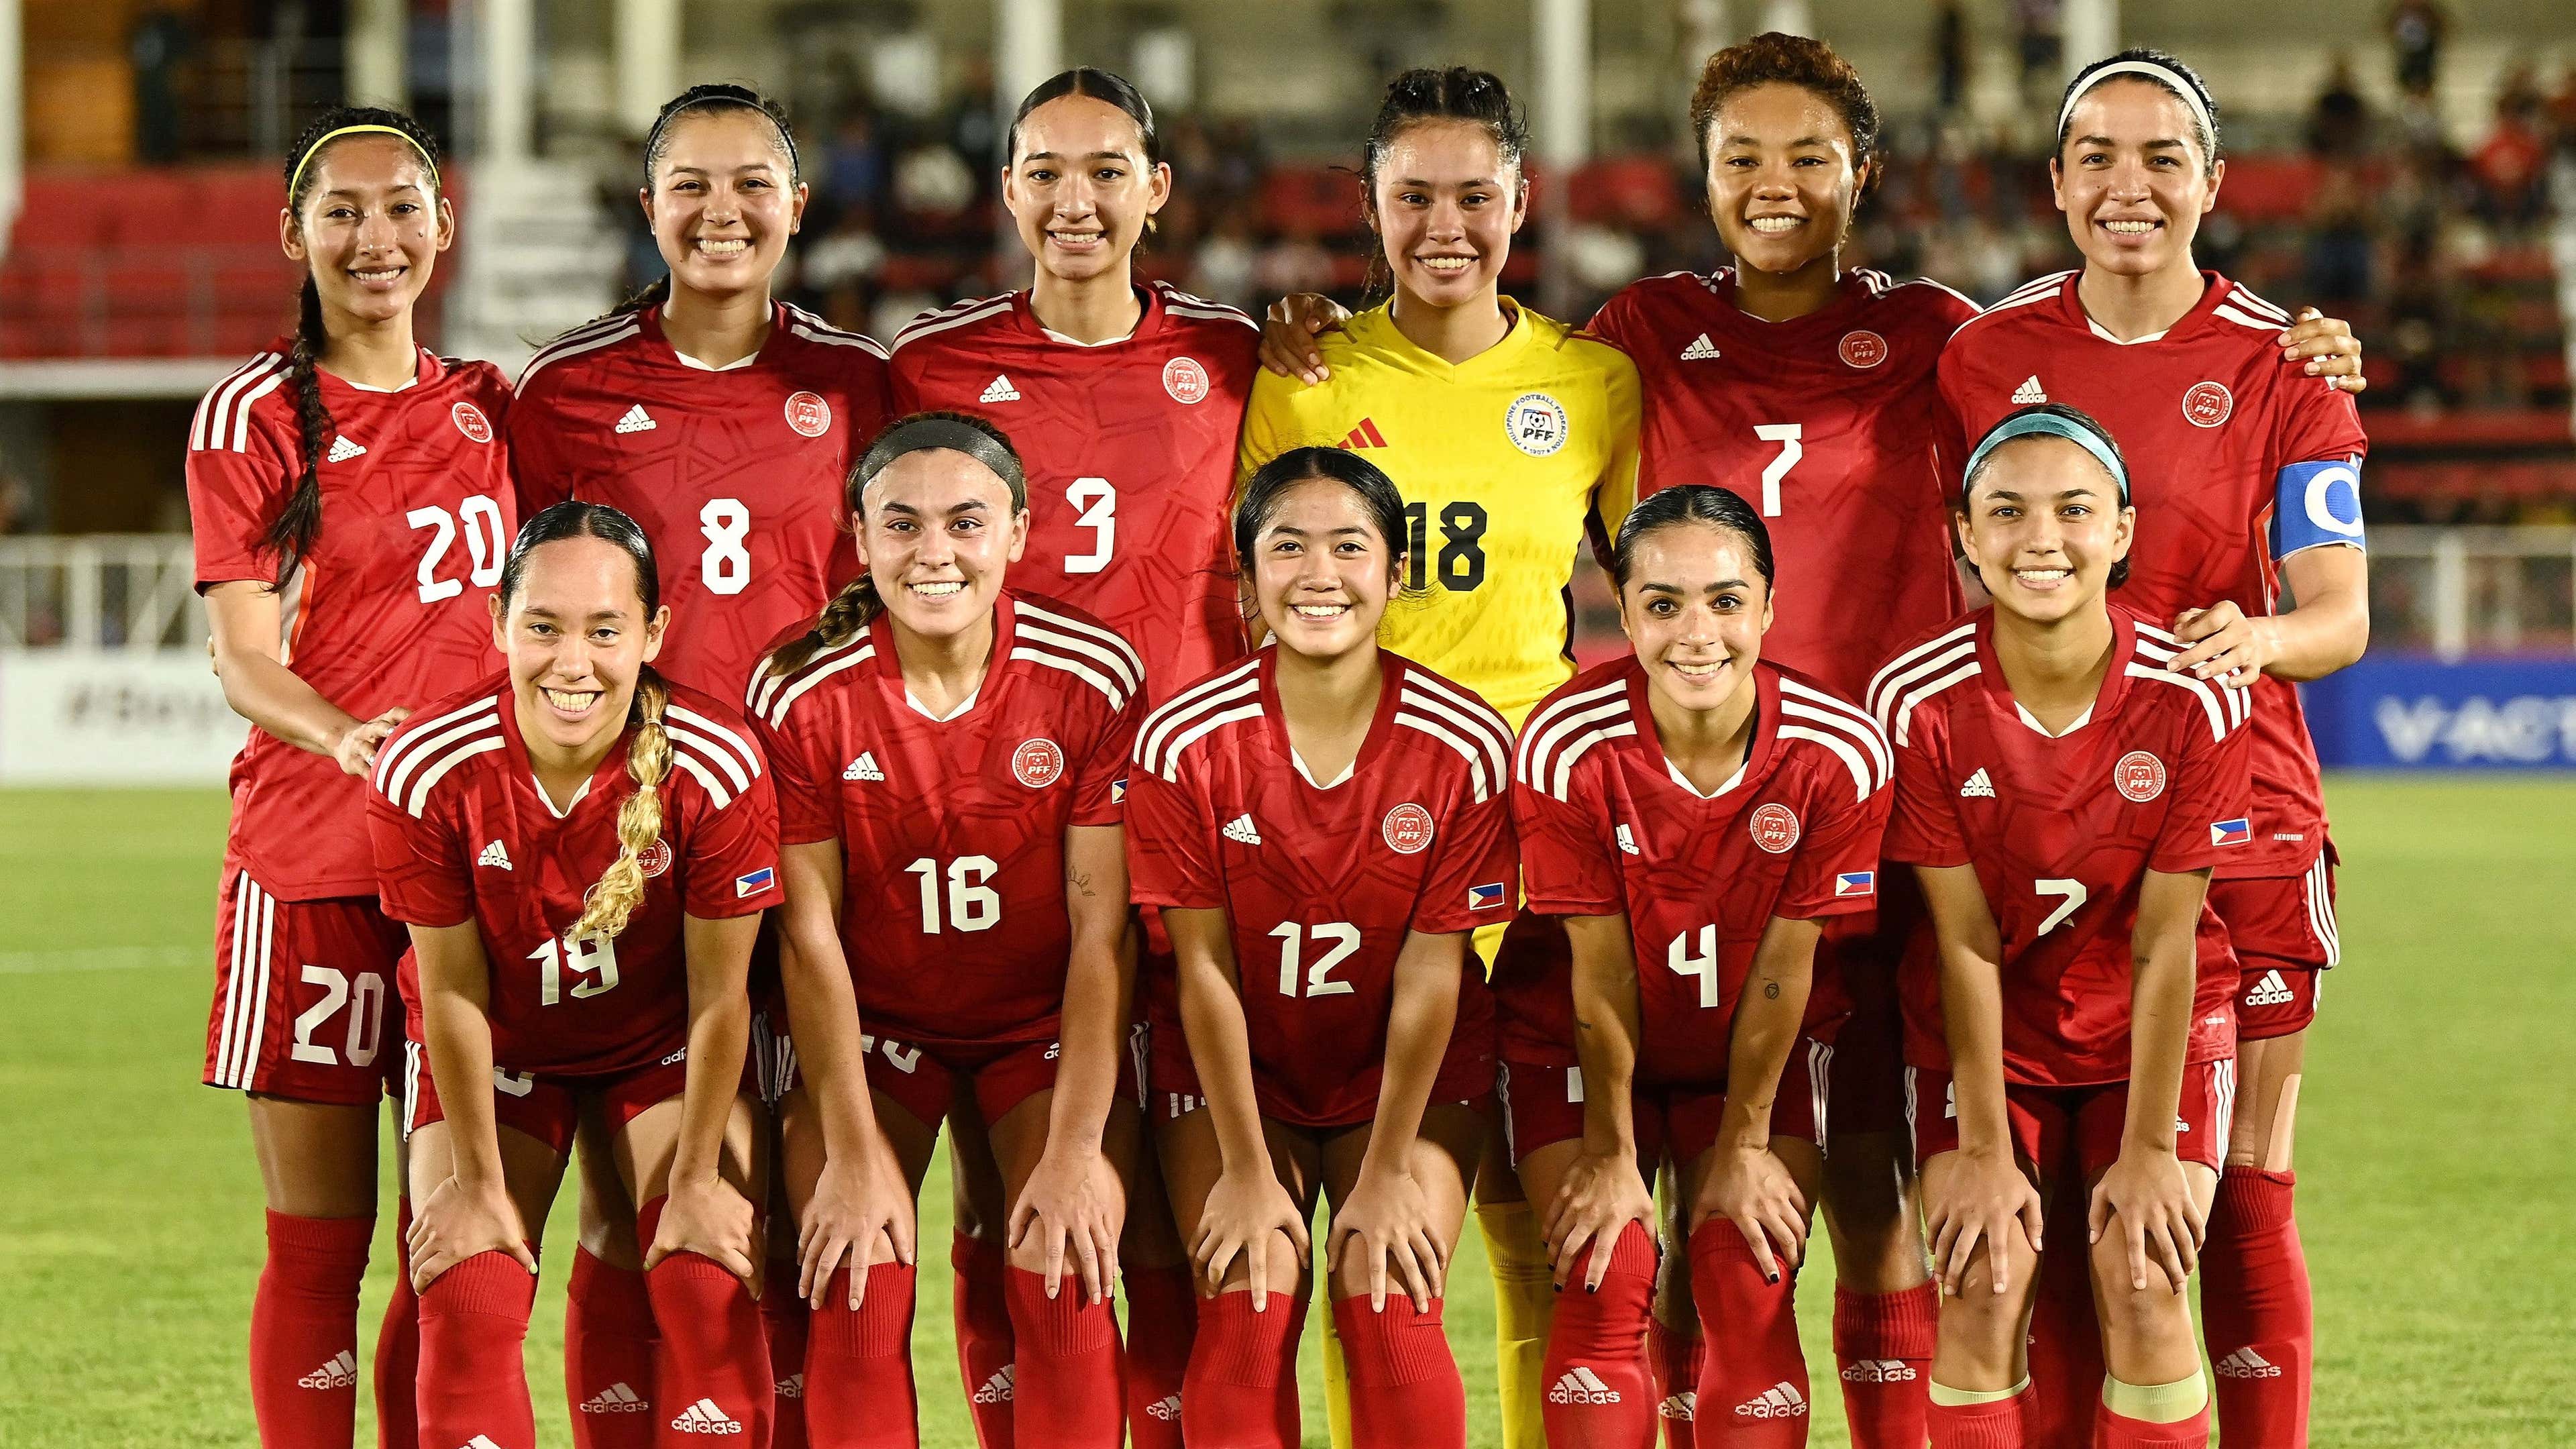 Why college soccer players are representing national teams globally.